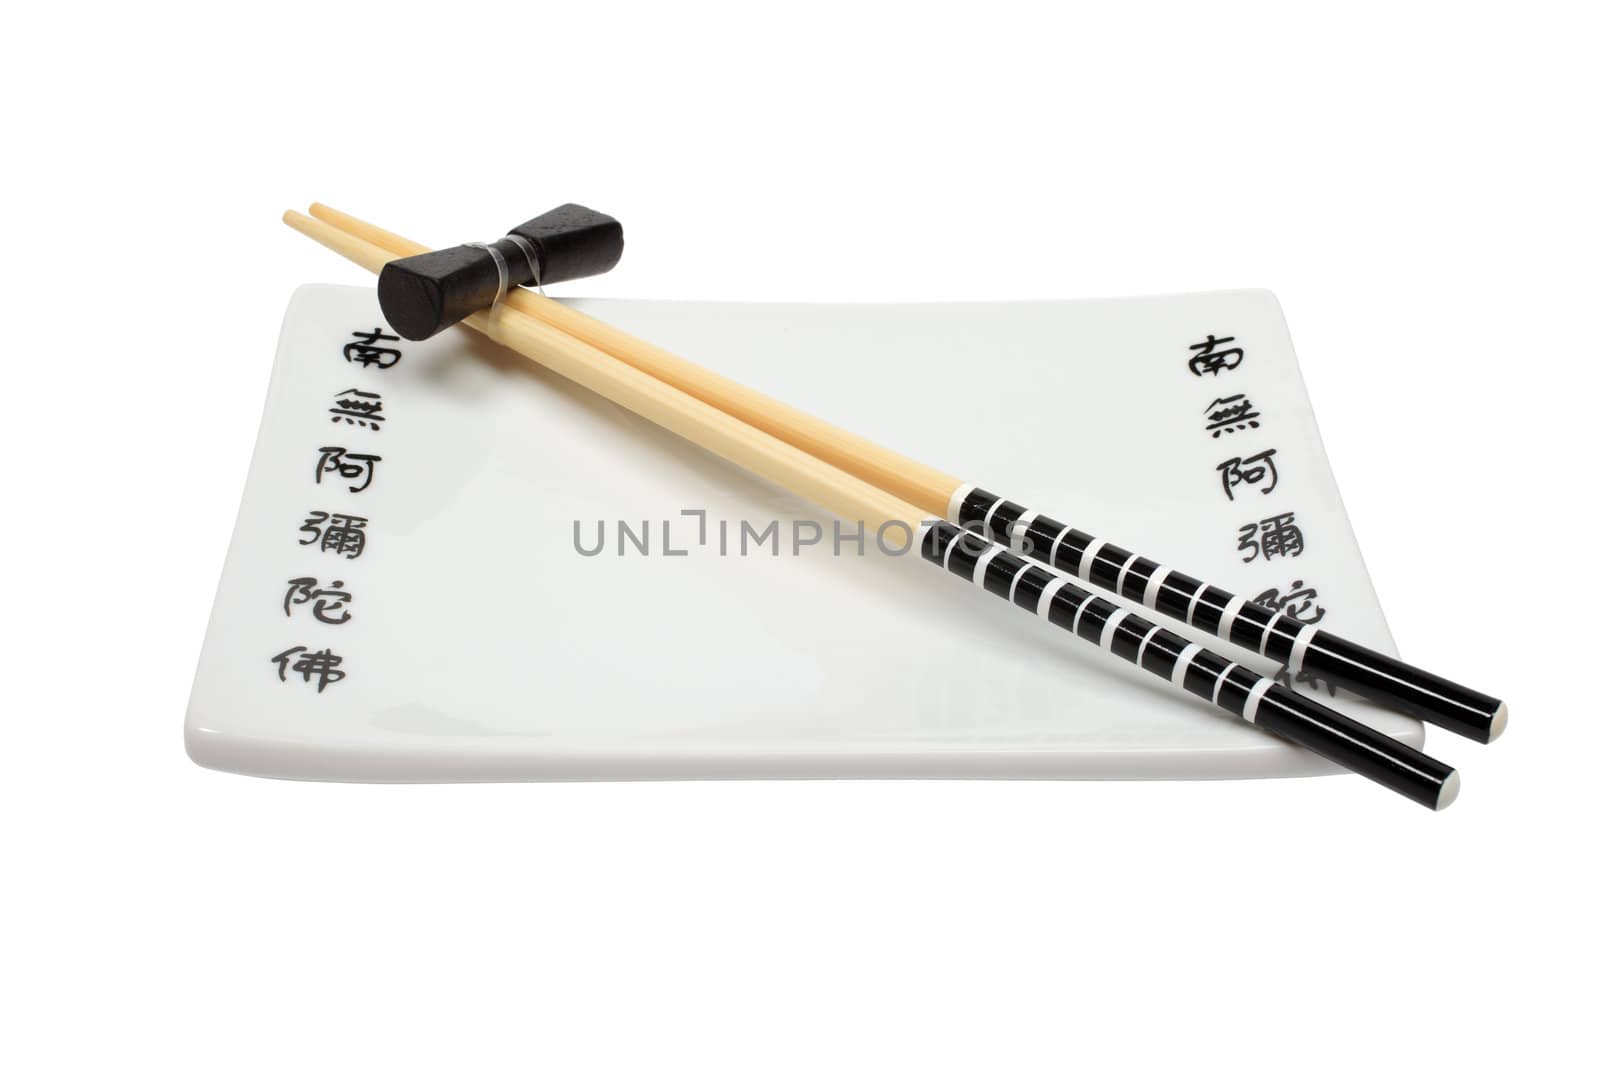 Unused asian chopsticks and plate isolated on white background.